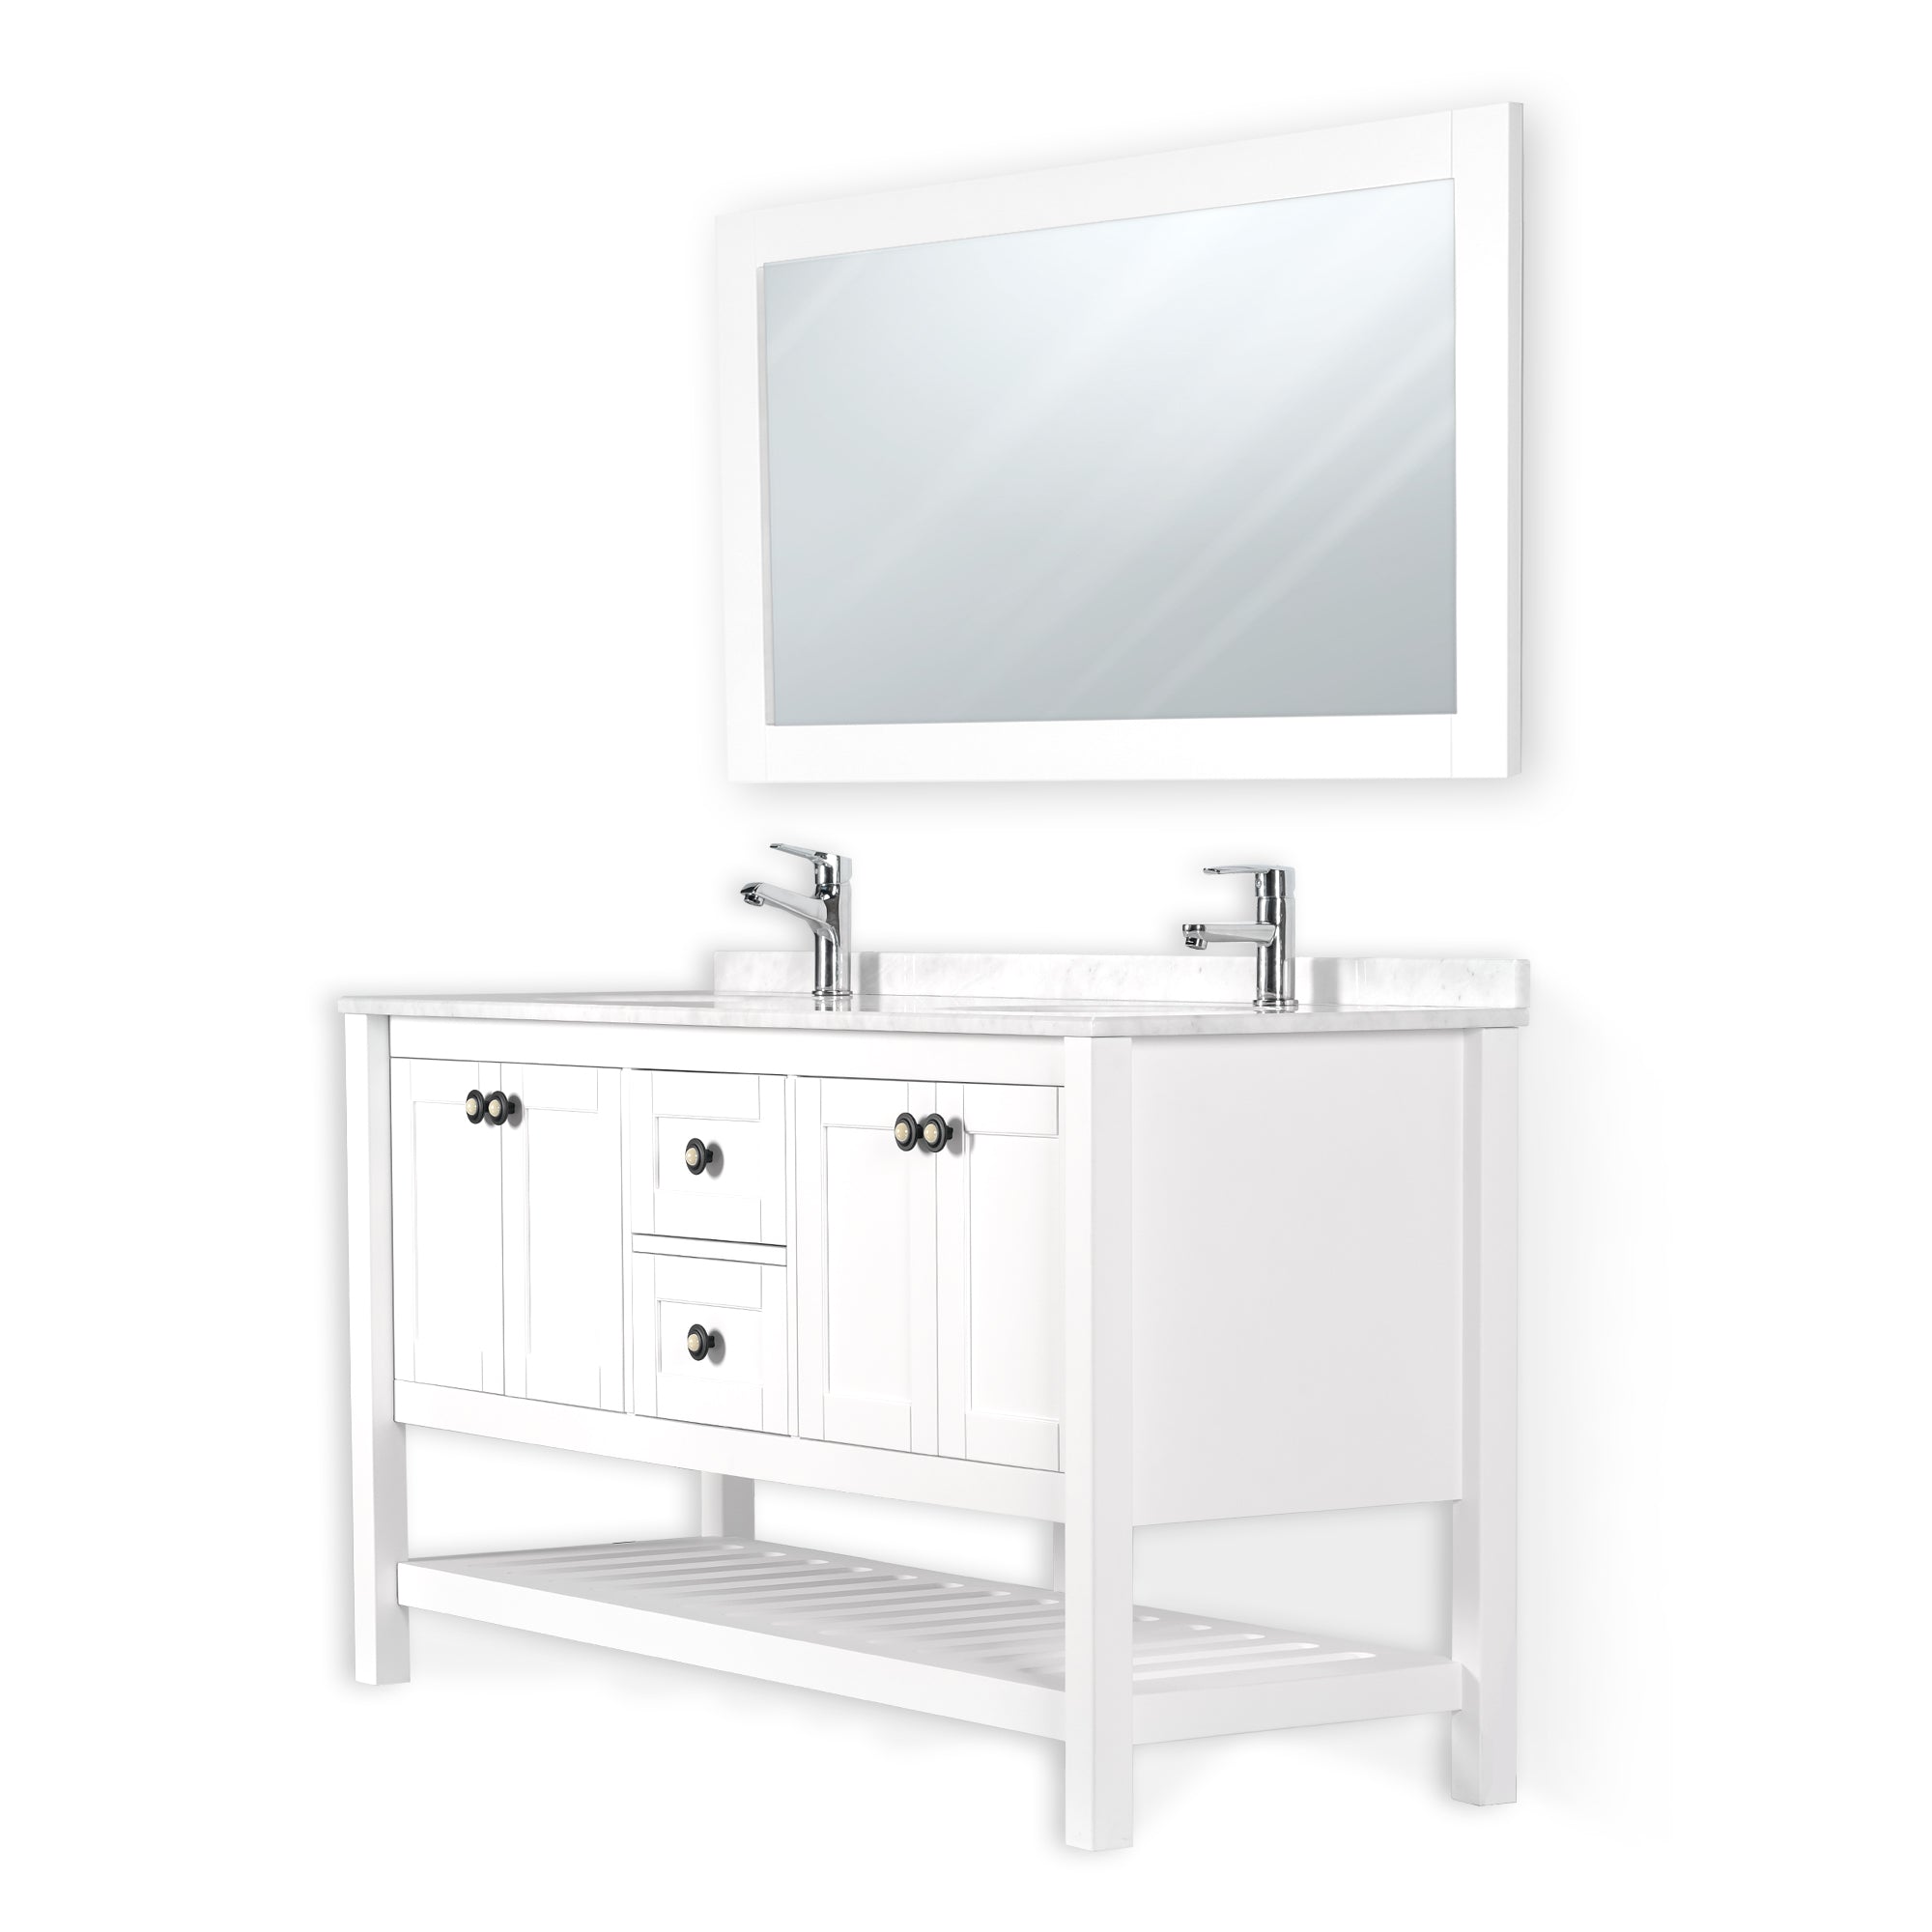 LUCCA 60 INCH FREE STANDING VANITY AND SINK COMBO WITH MATCHING MIRROR - WHITE